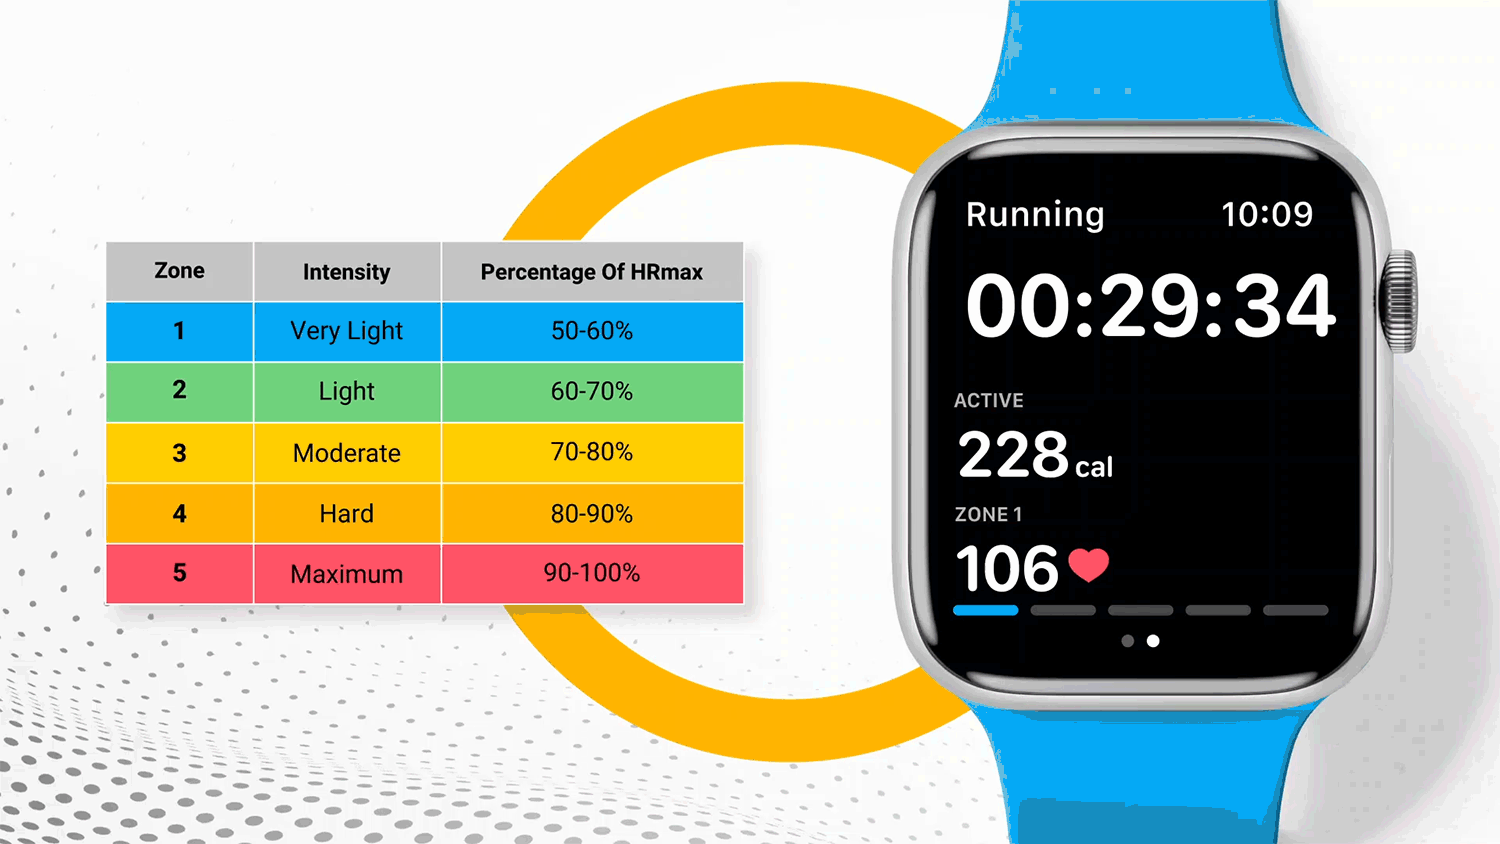 New colored bars to indicate each heart rate zone